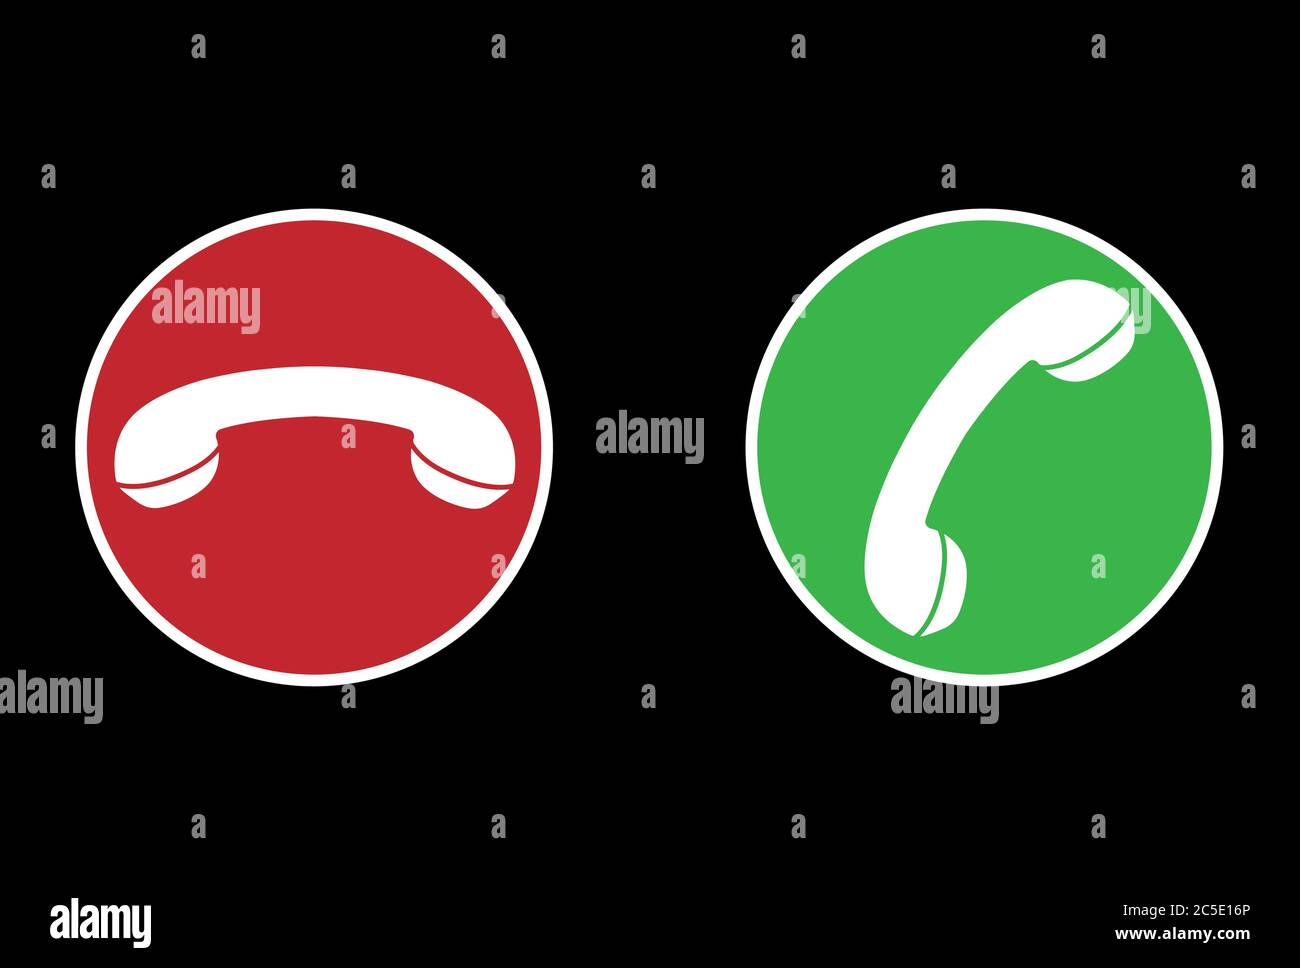 answer or reject call icons, red and green circular icons with handset icon vector illustration Stock Vector